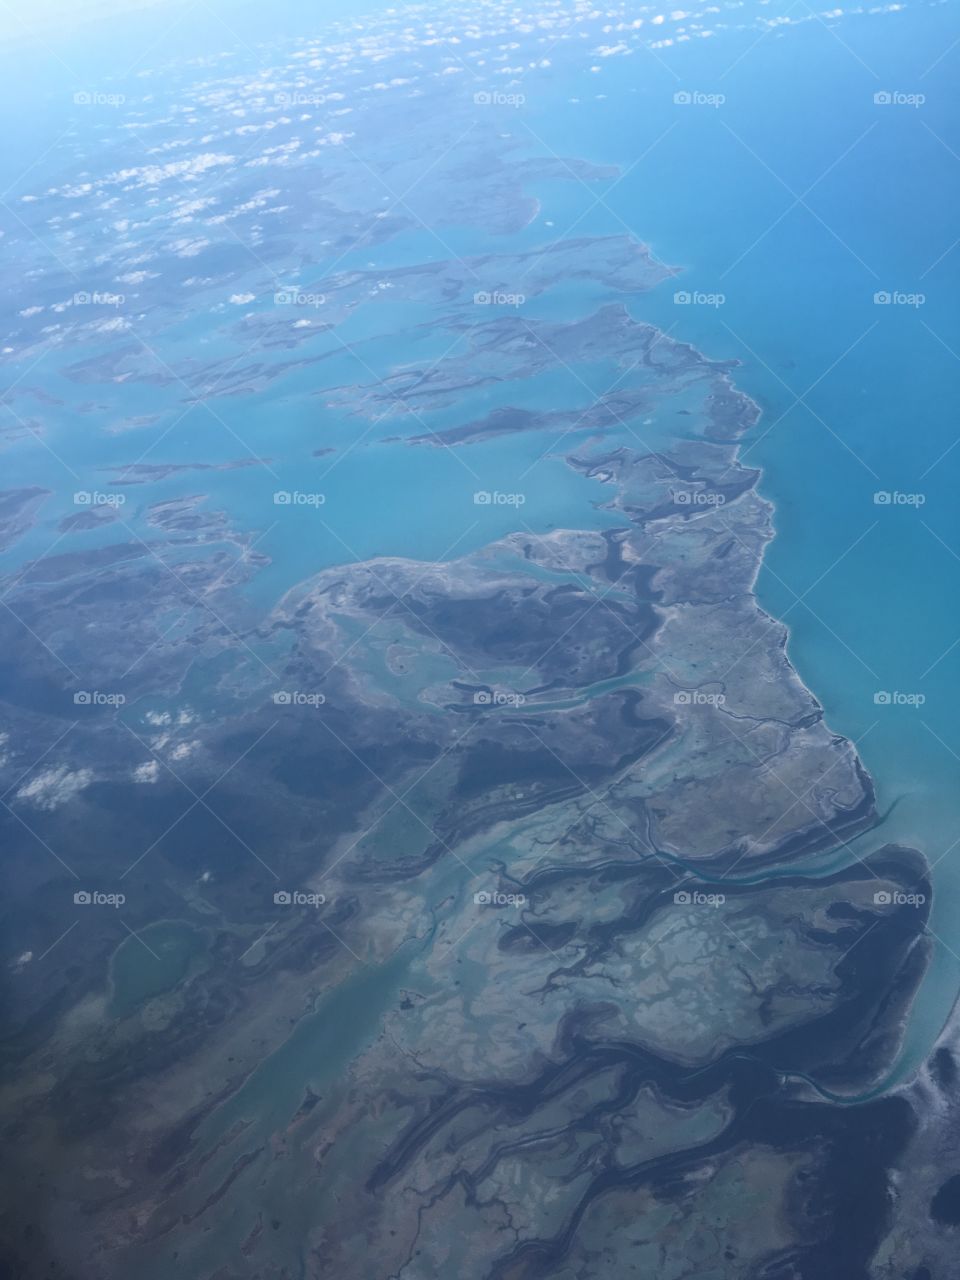 Possibly the island of Andros as seen from an aerial view